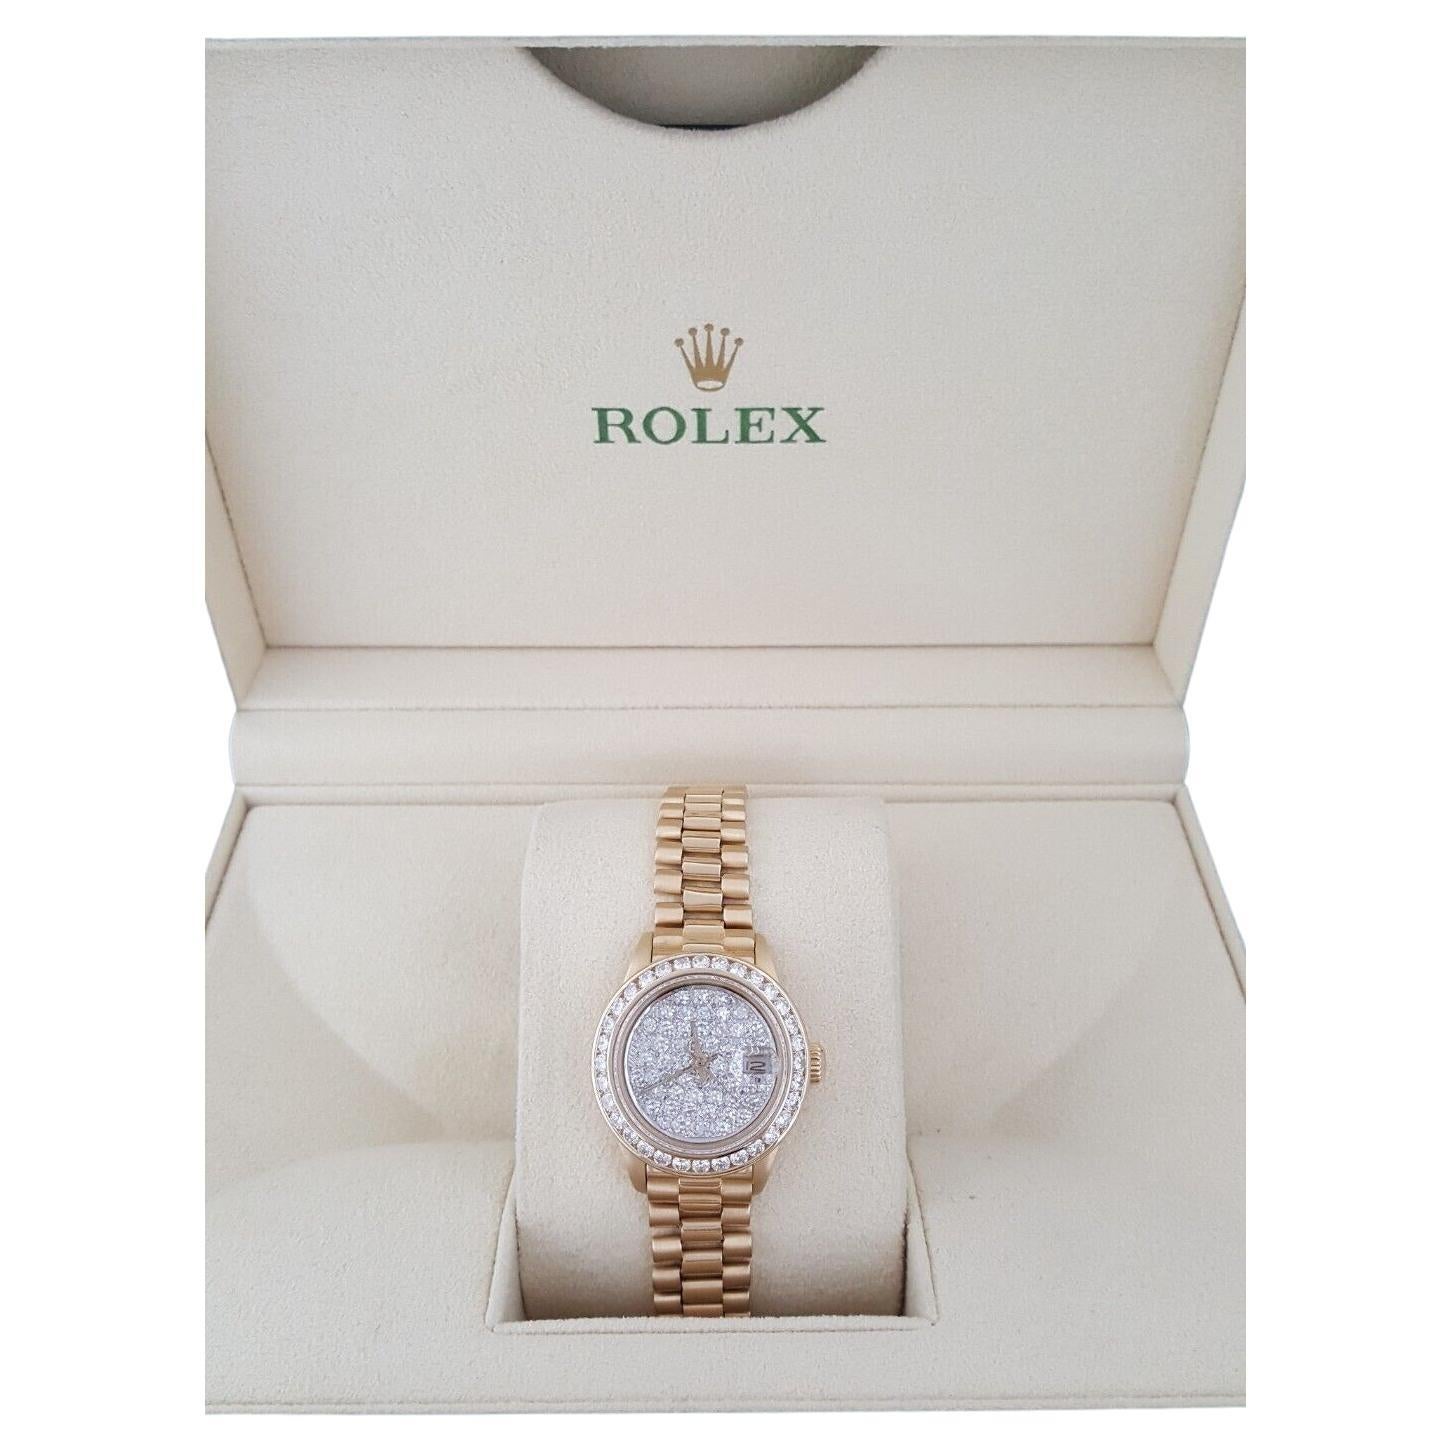 Authentic Rolex Lady Date-Just President 69178 18K Yellow Gold 26 mm Factory Diamond Dial & Bezel.

The watch features a screw-down crown 18K Yellow gold Factory diamond bezel, sapphire cyclops crystal, Champagne dial with 18k yellow gold & Factory